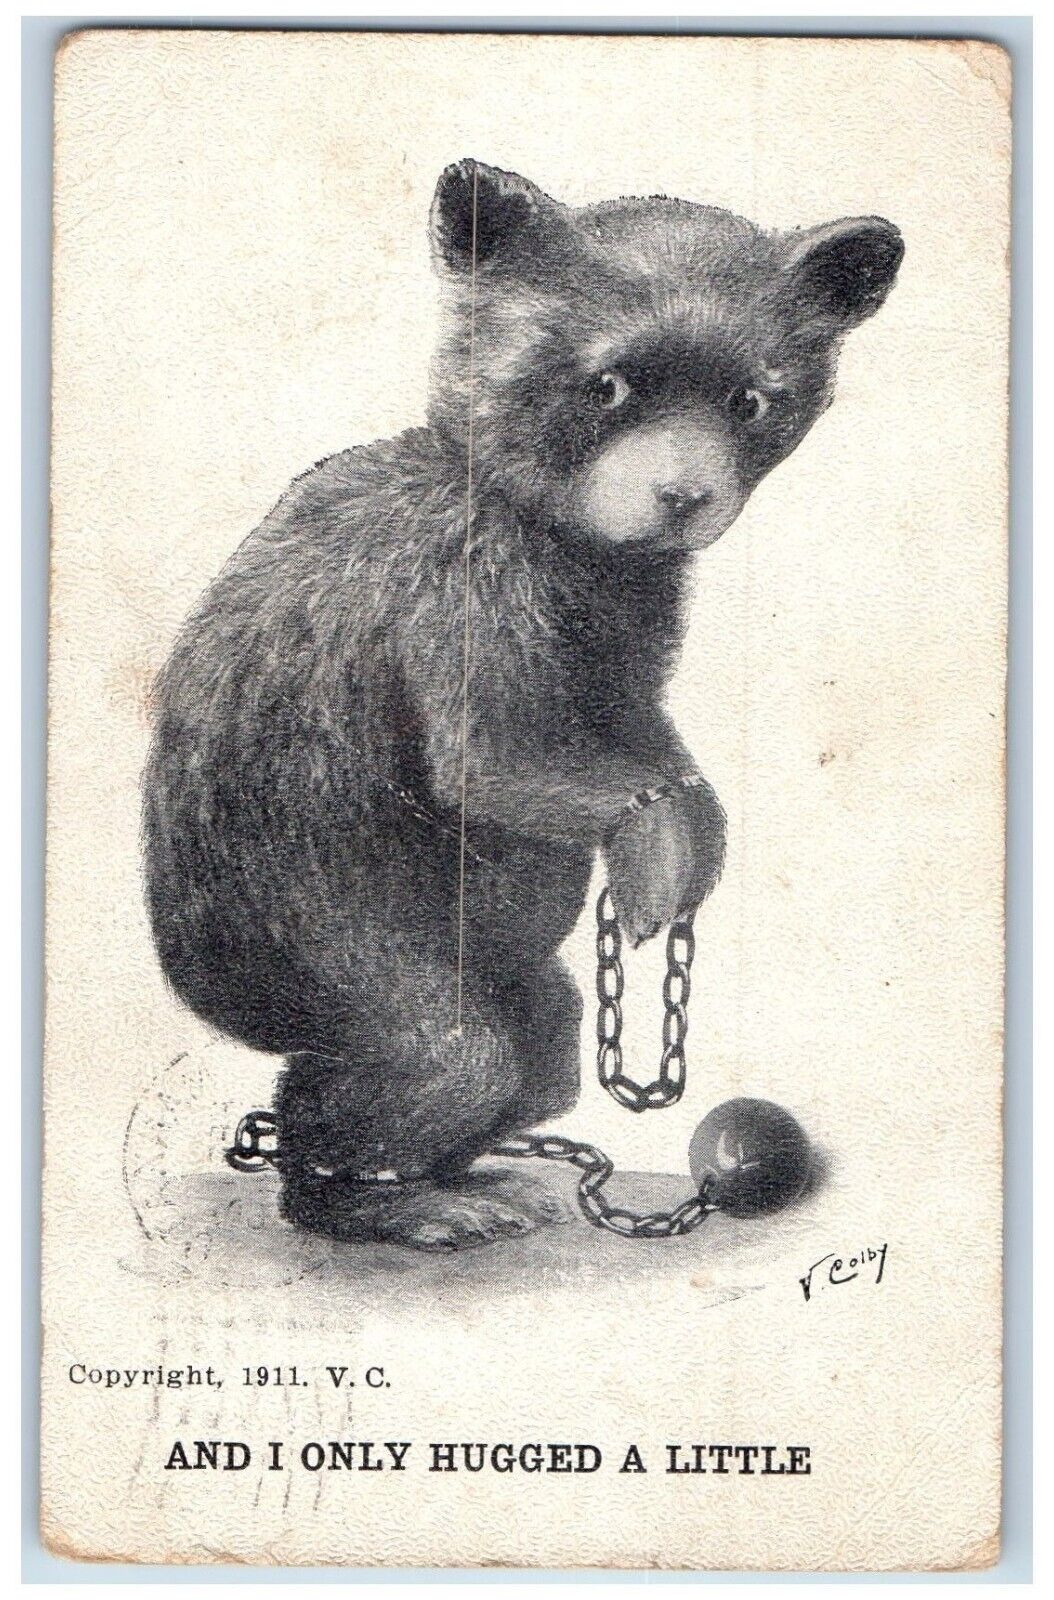 V. Colby Artist Signed Postcard Bear With Chain And I Only Hugged A Little 1912